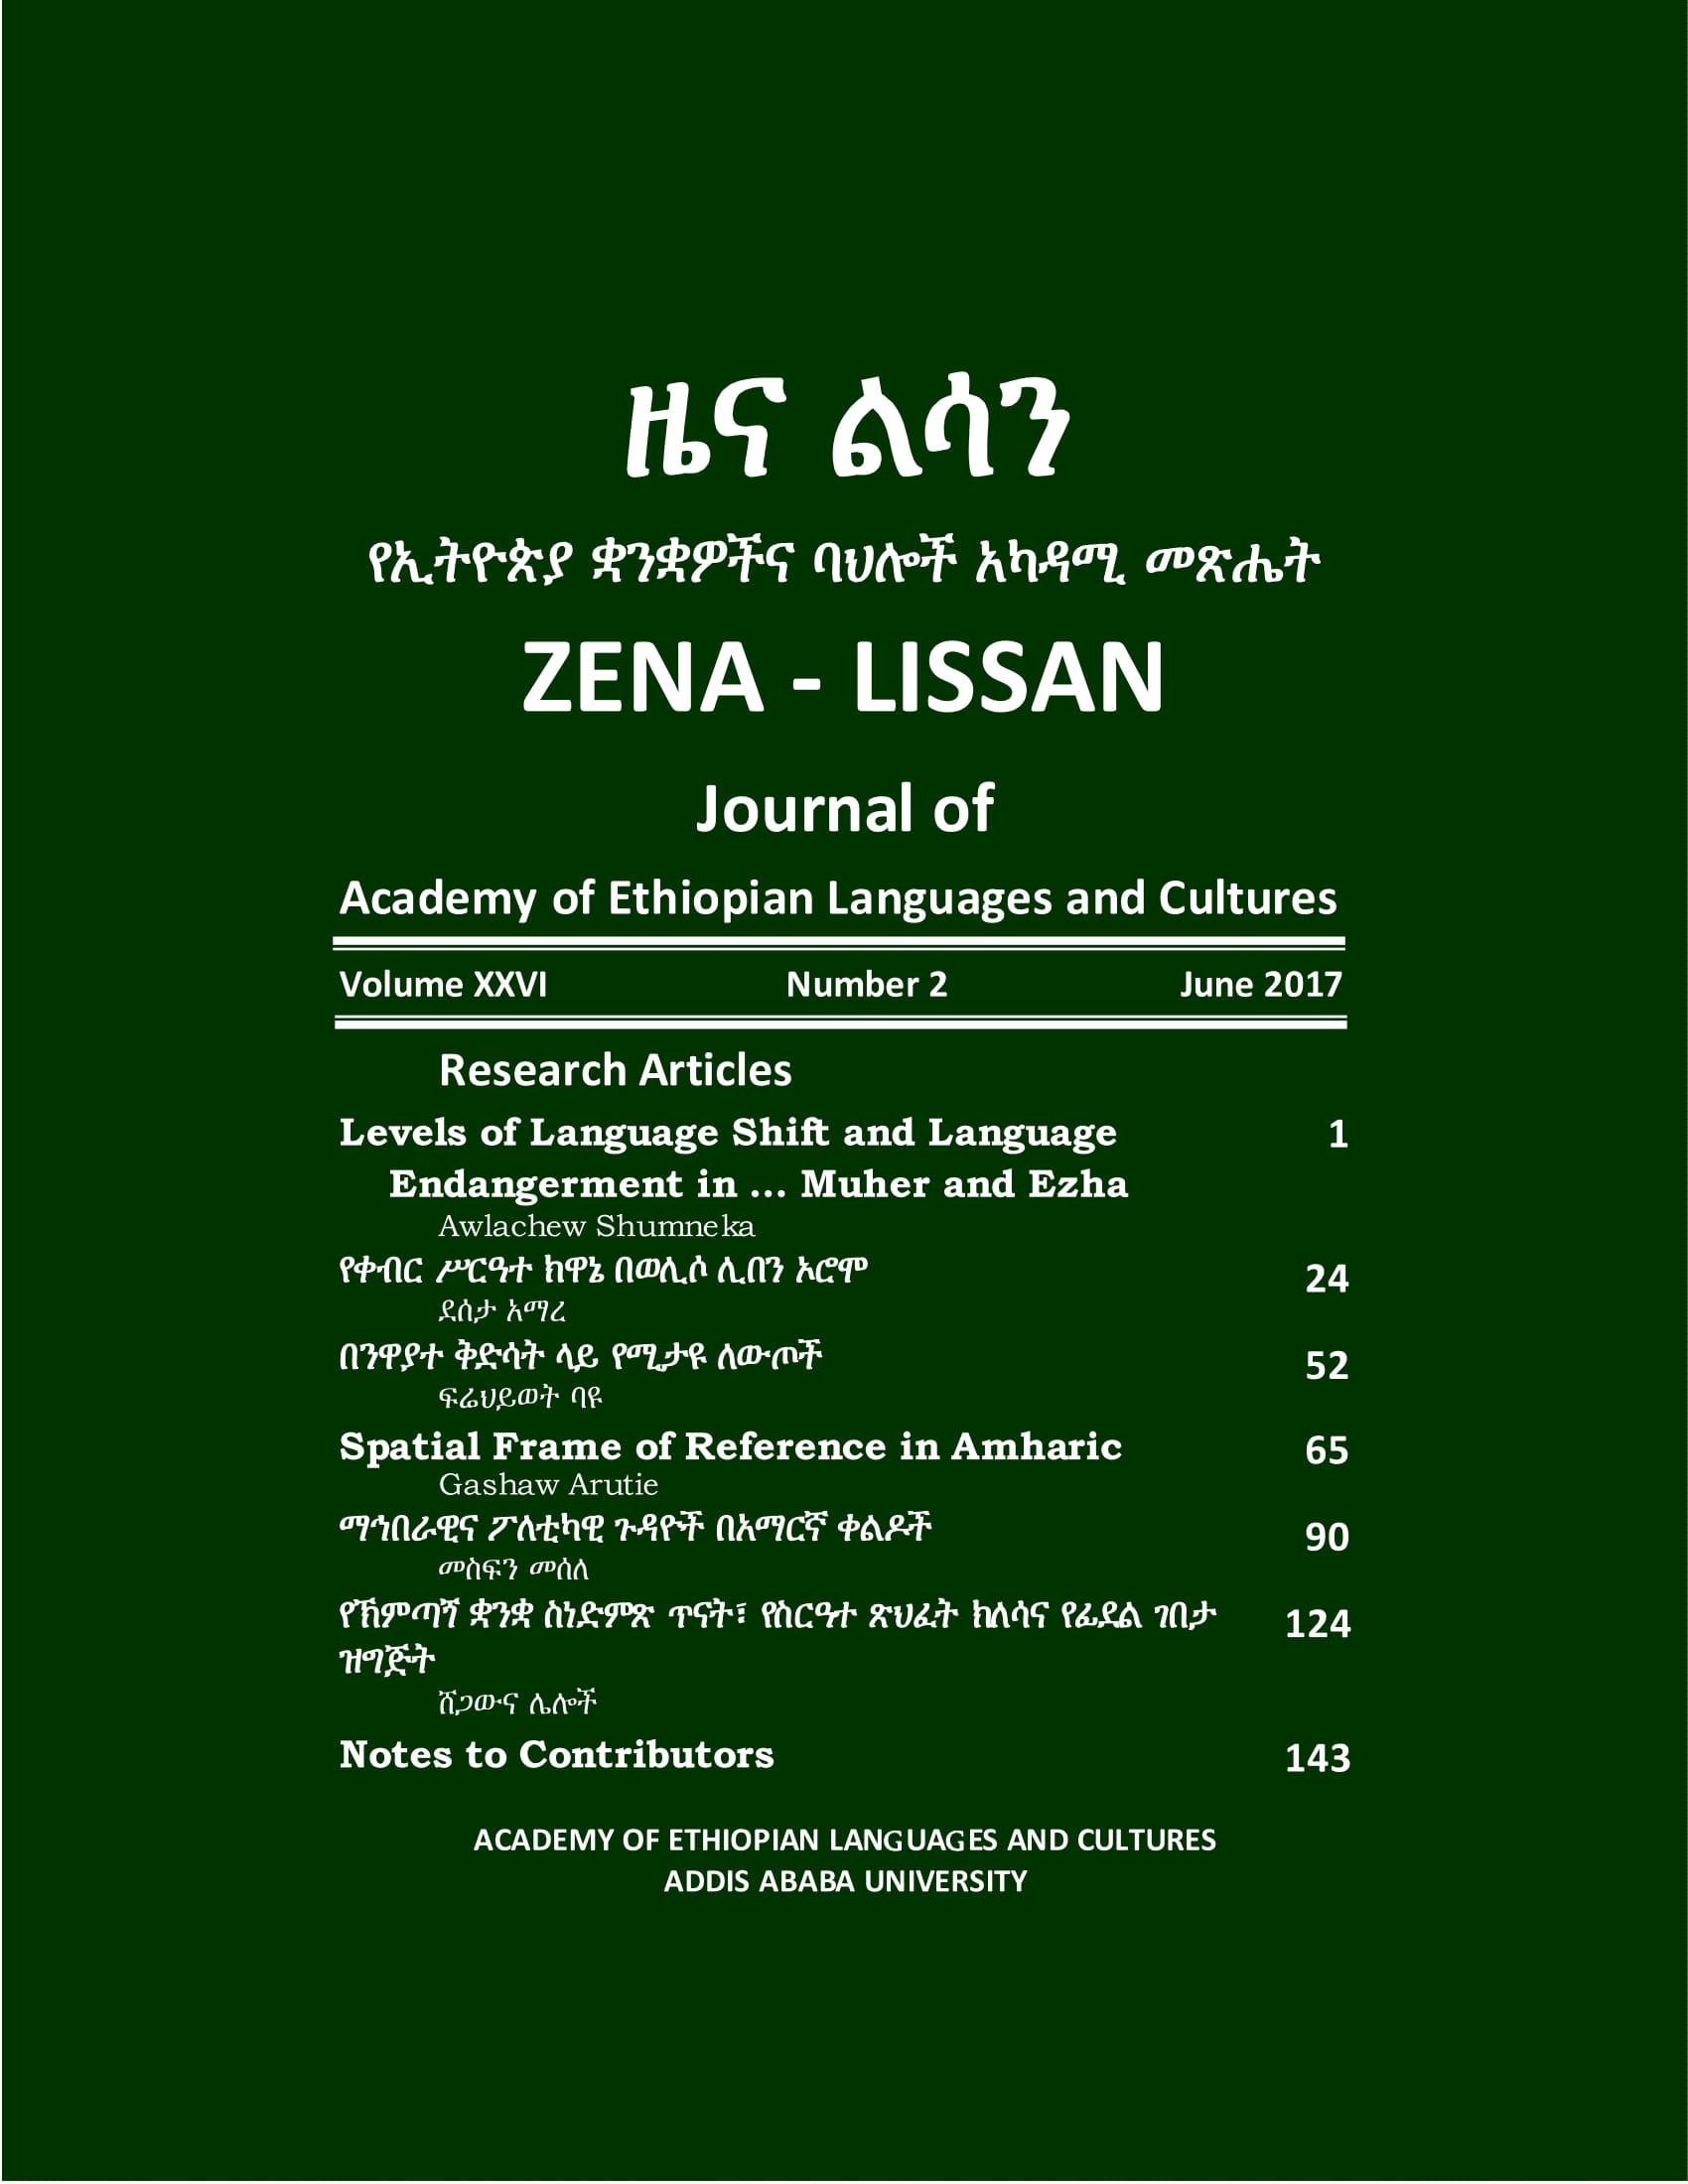 					View Vol. 26 No. 2 (2017): ZENA-LISSAN Journal of Ethiopian Languages and Cultures
				